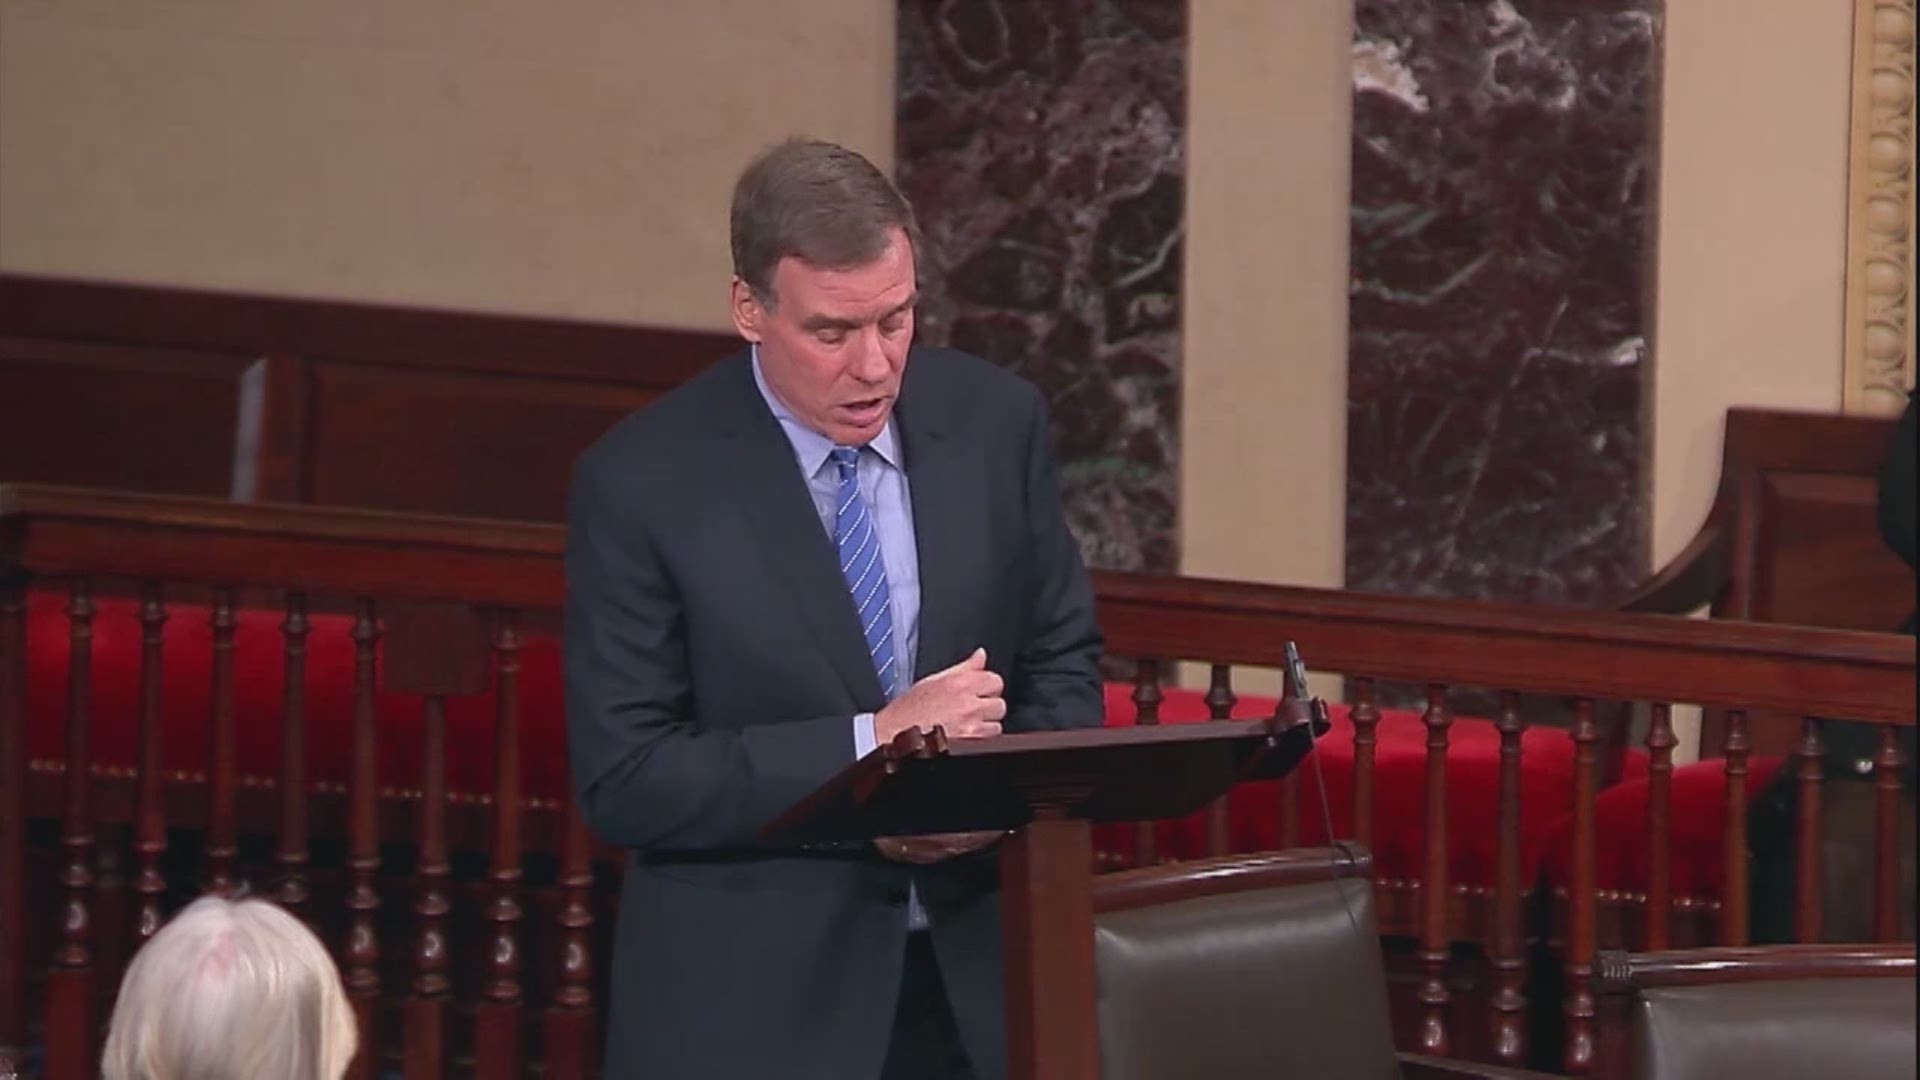 On the Senate floor, U.S. Sen. Mark R. Warner (D-VA) urged his Senate colleagues to oppose President Trump’s nomination of William Barr to serve as Attorney General.